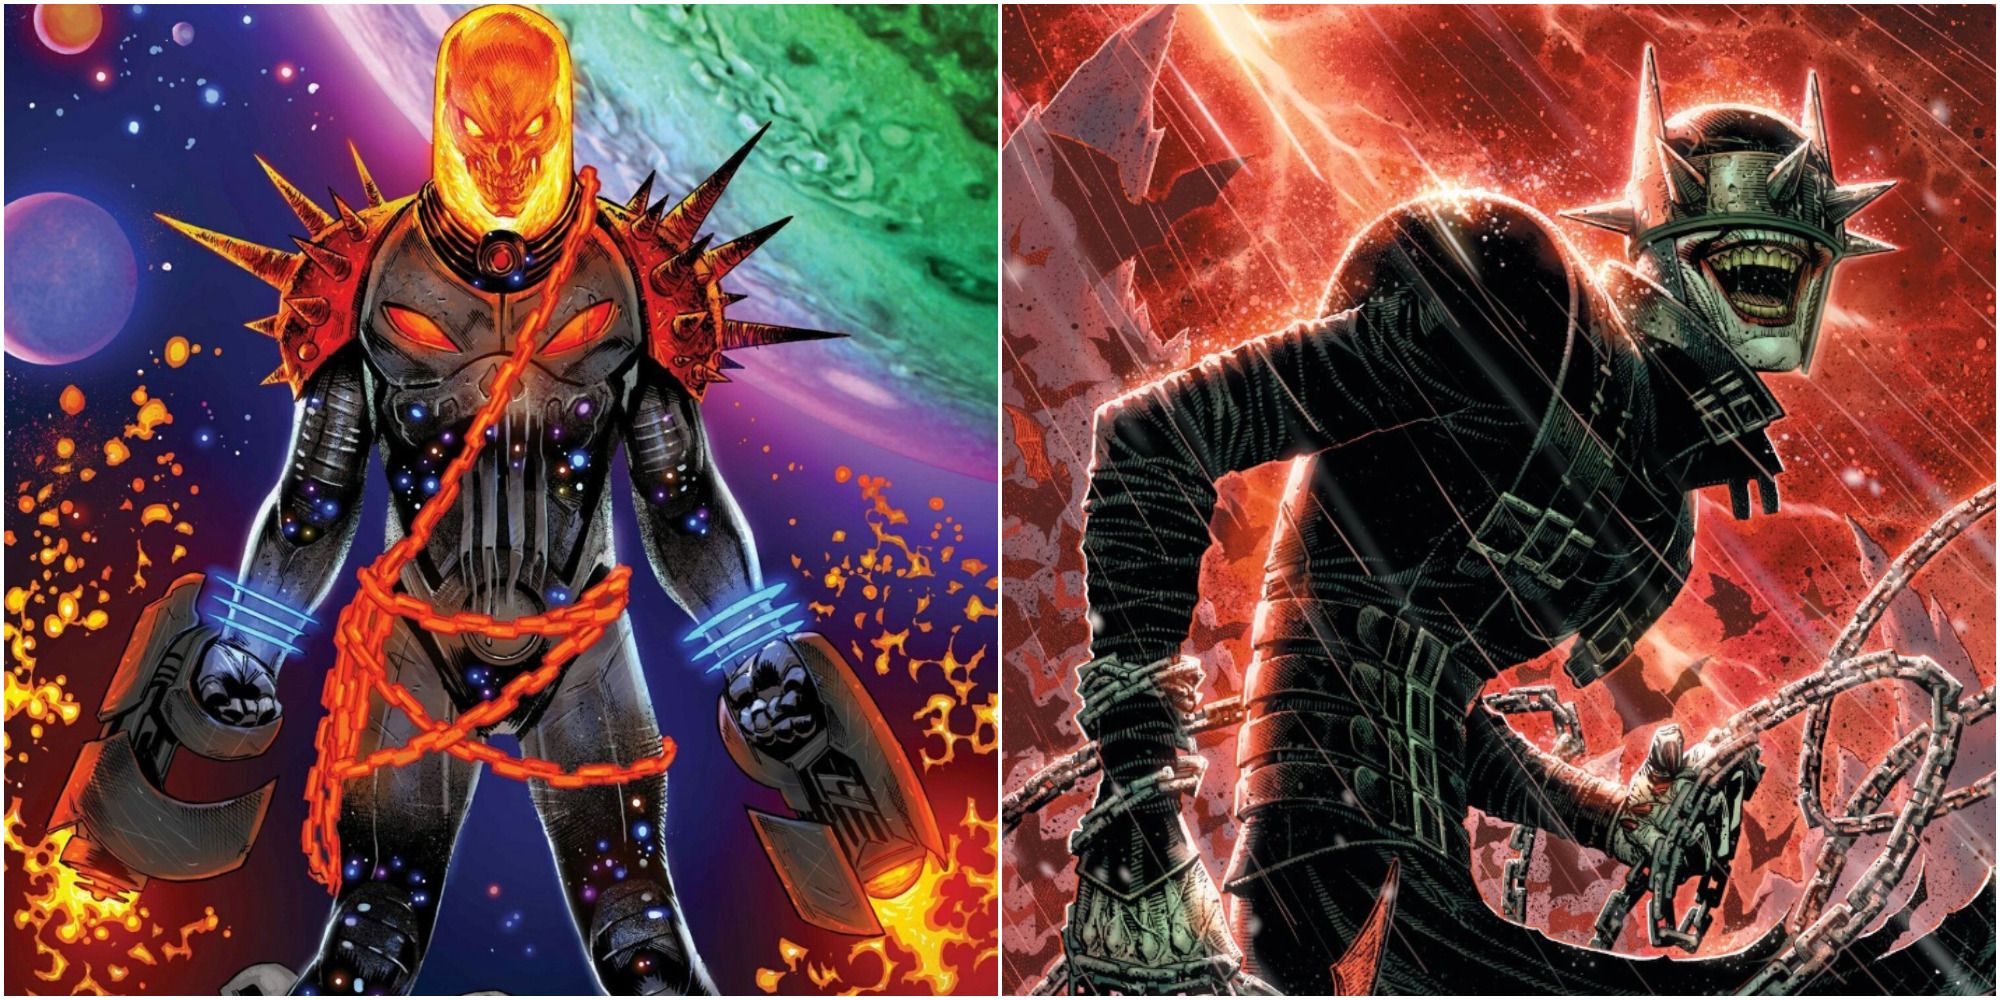 Cosmic Ghost Rider and Batman Who Laughs